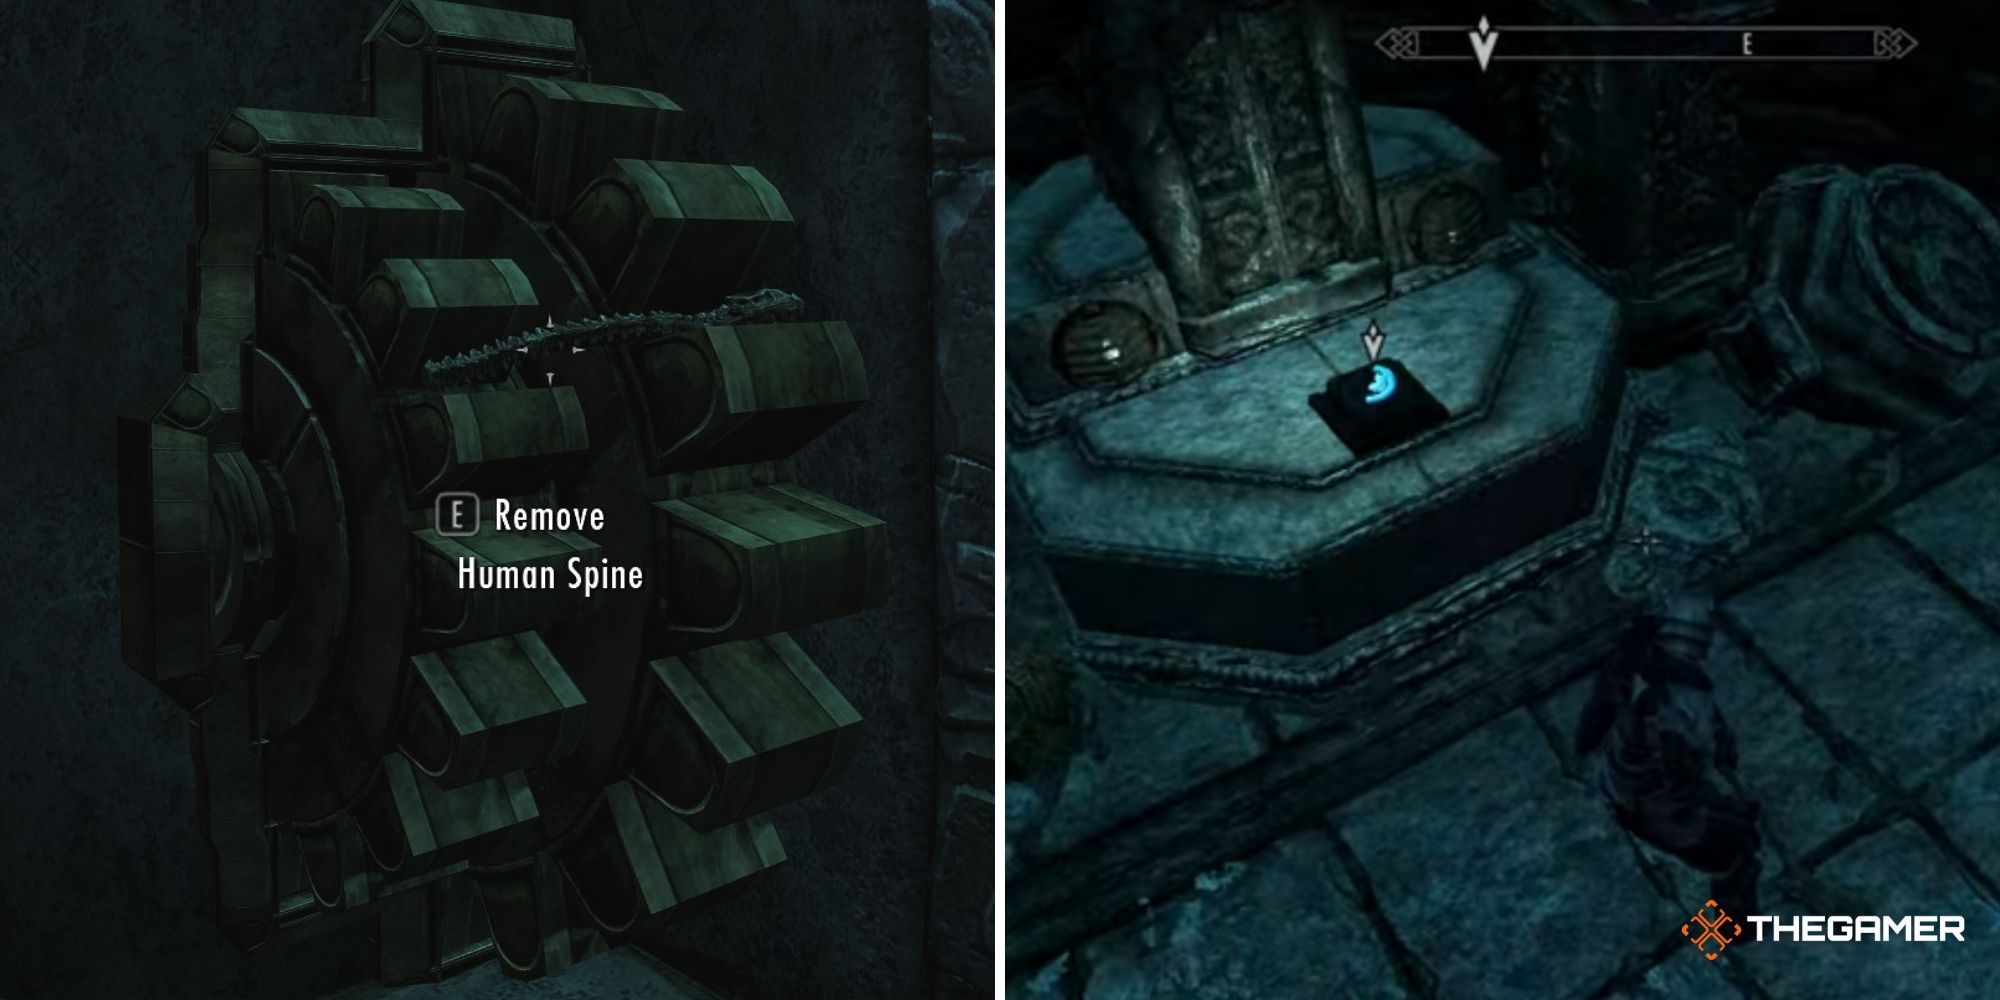 Skryim - Lost to the Ages Quest Walkthrough, Raldbthar (left - human spine caught in gear) (right - Aetherium Shard)